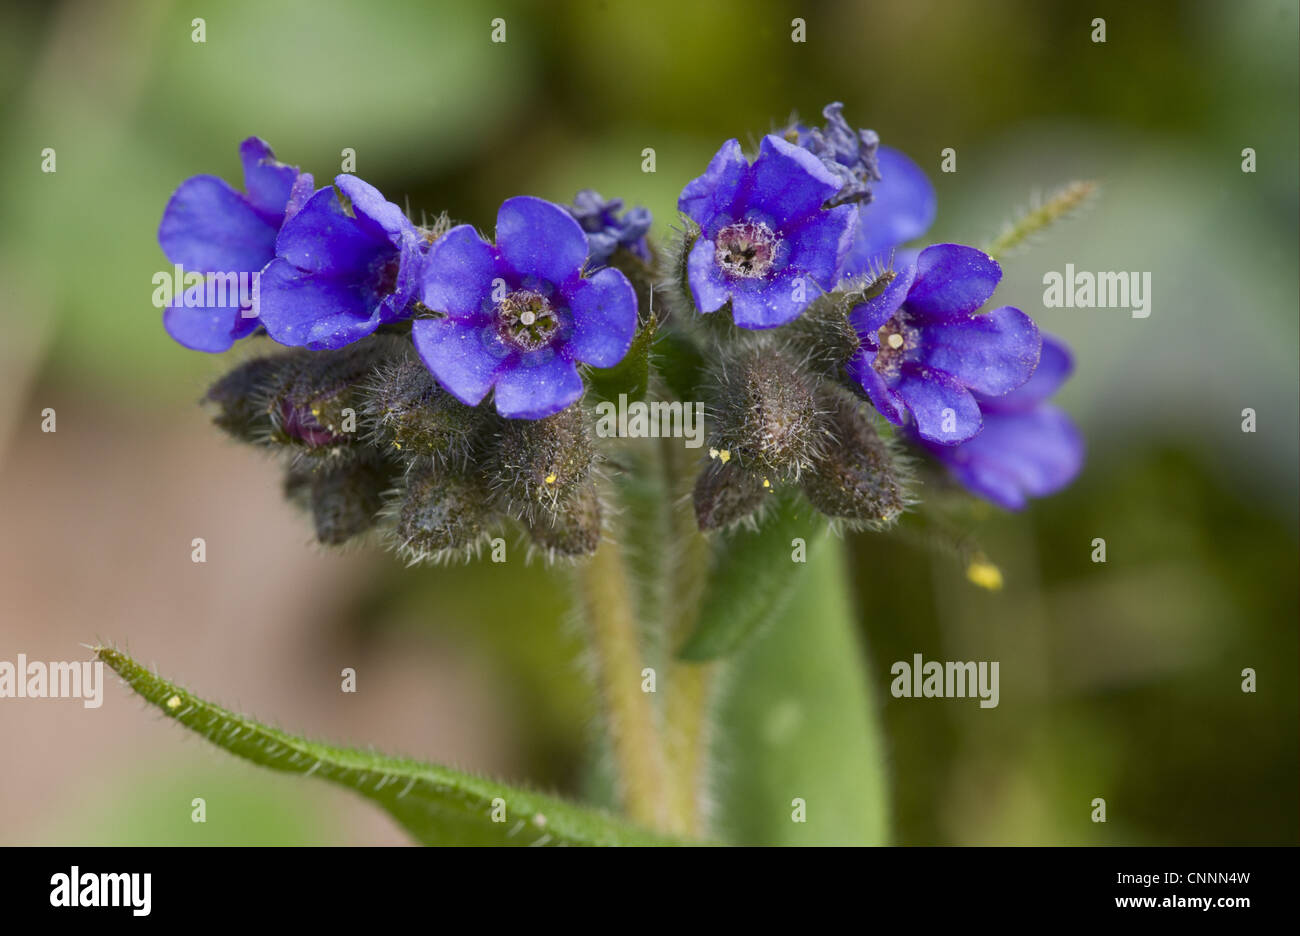 Narrow-leaved Lungwort (Pulmonaria longifolia) close-up of flowers, at native site, Dorset, England, march Stock Photo